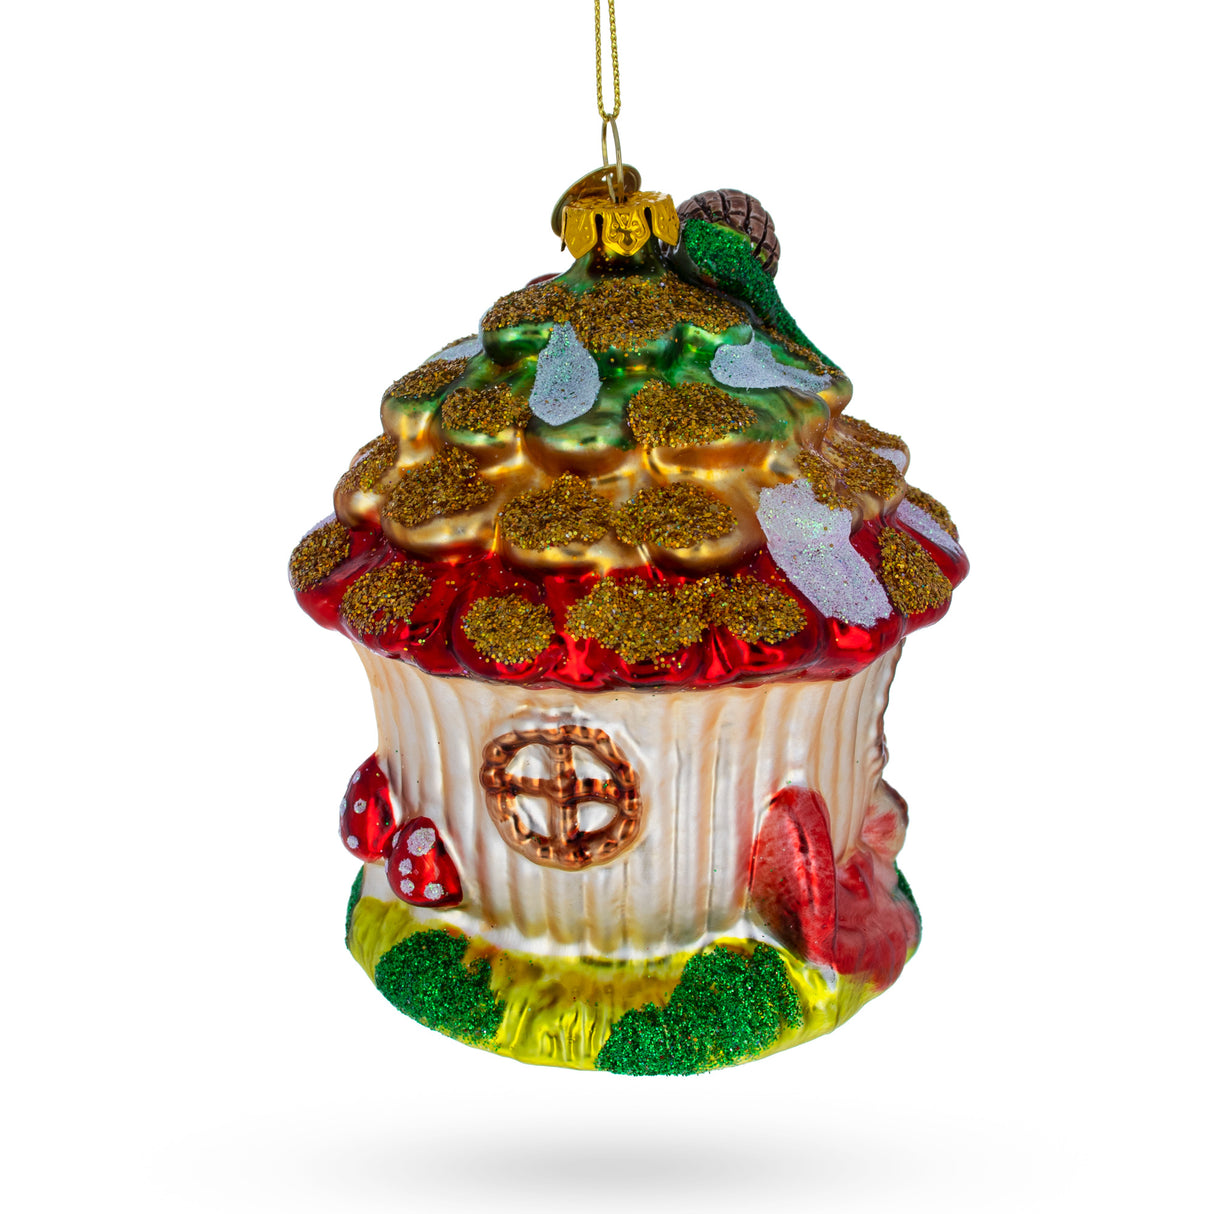 BestPysanky online gift shop sells mouth blown hand made painted xmas decor decorations figurine unique luxury collectible heirloom vintage whimsical elegant festive balls baubles old fashioned european german collection artisan hanging personalized